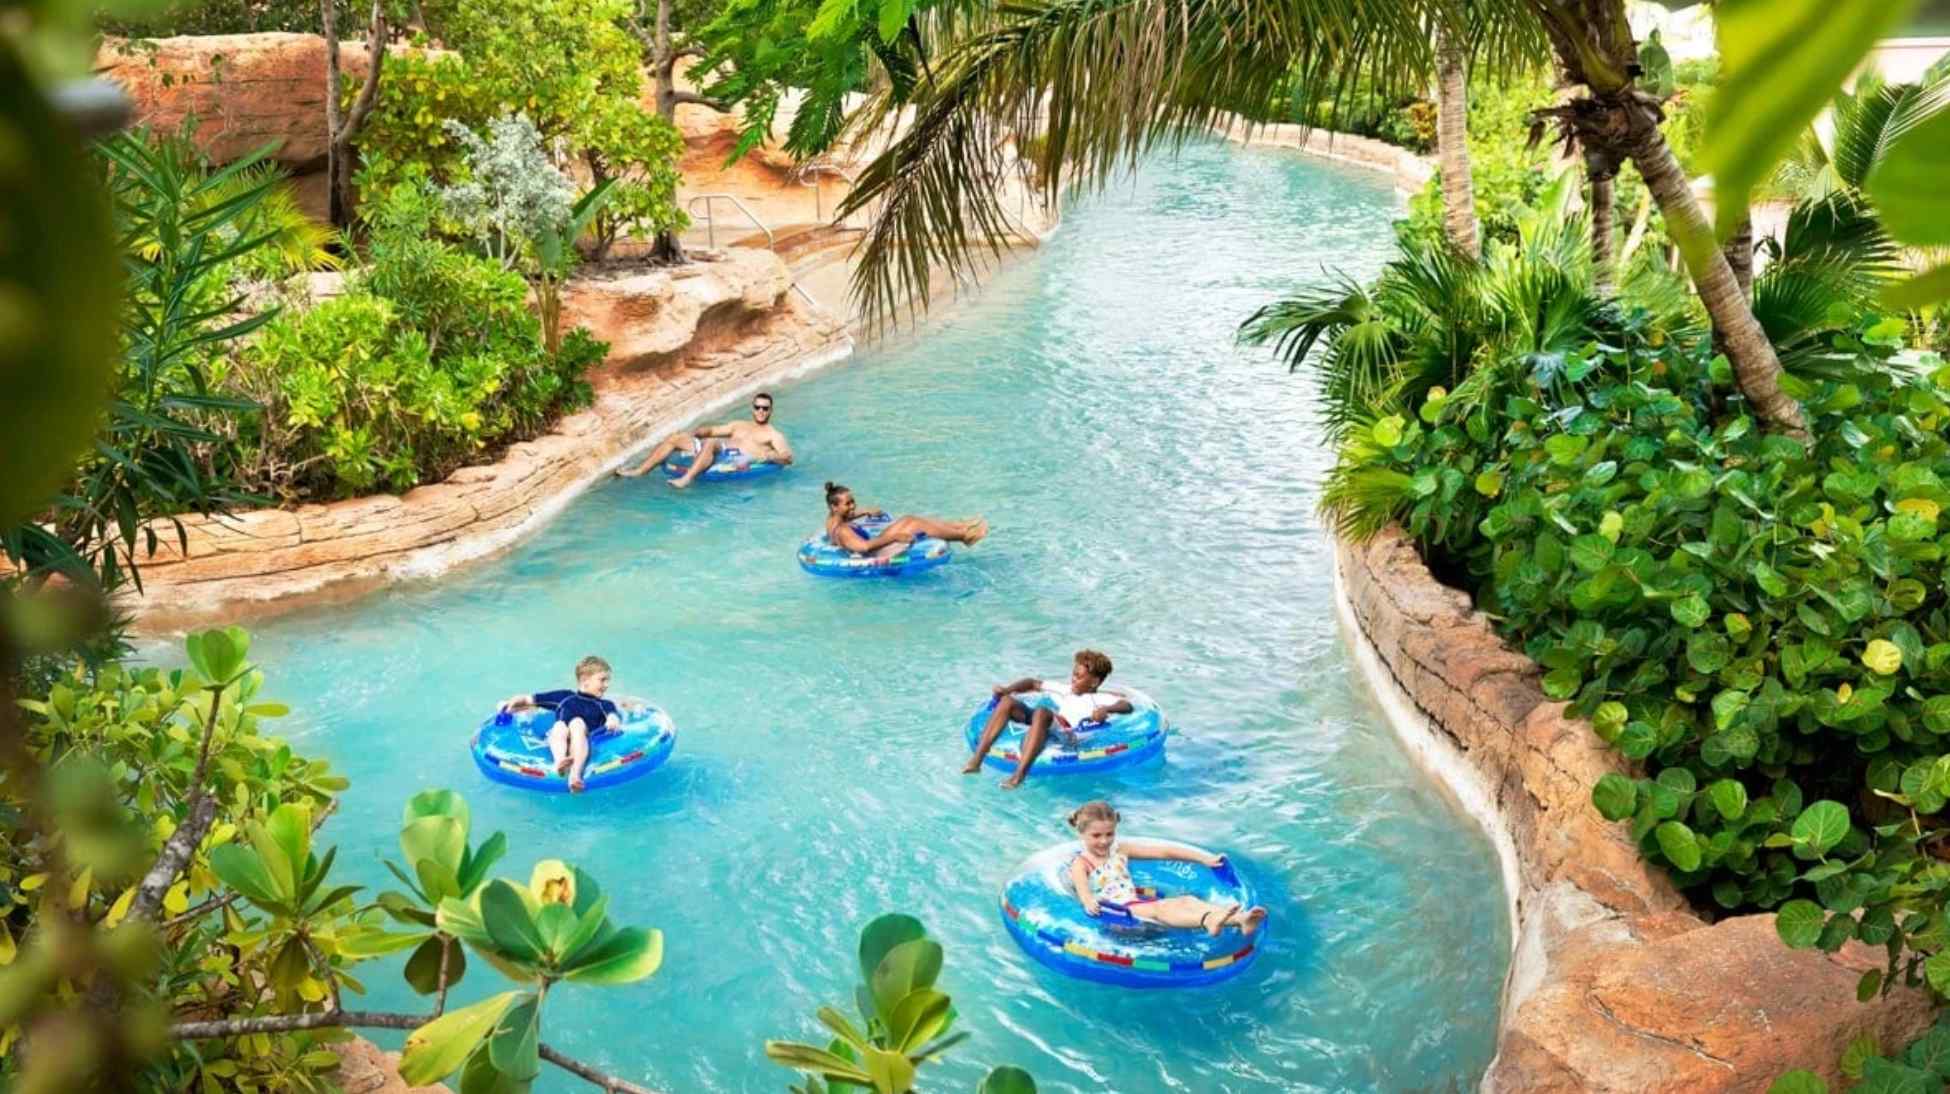 Take a tranquil journey along Juha's 360-metre lazy river, gliding through the park on single or double-seater tubes.